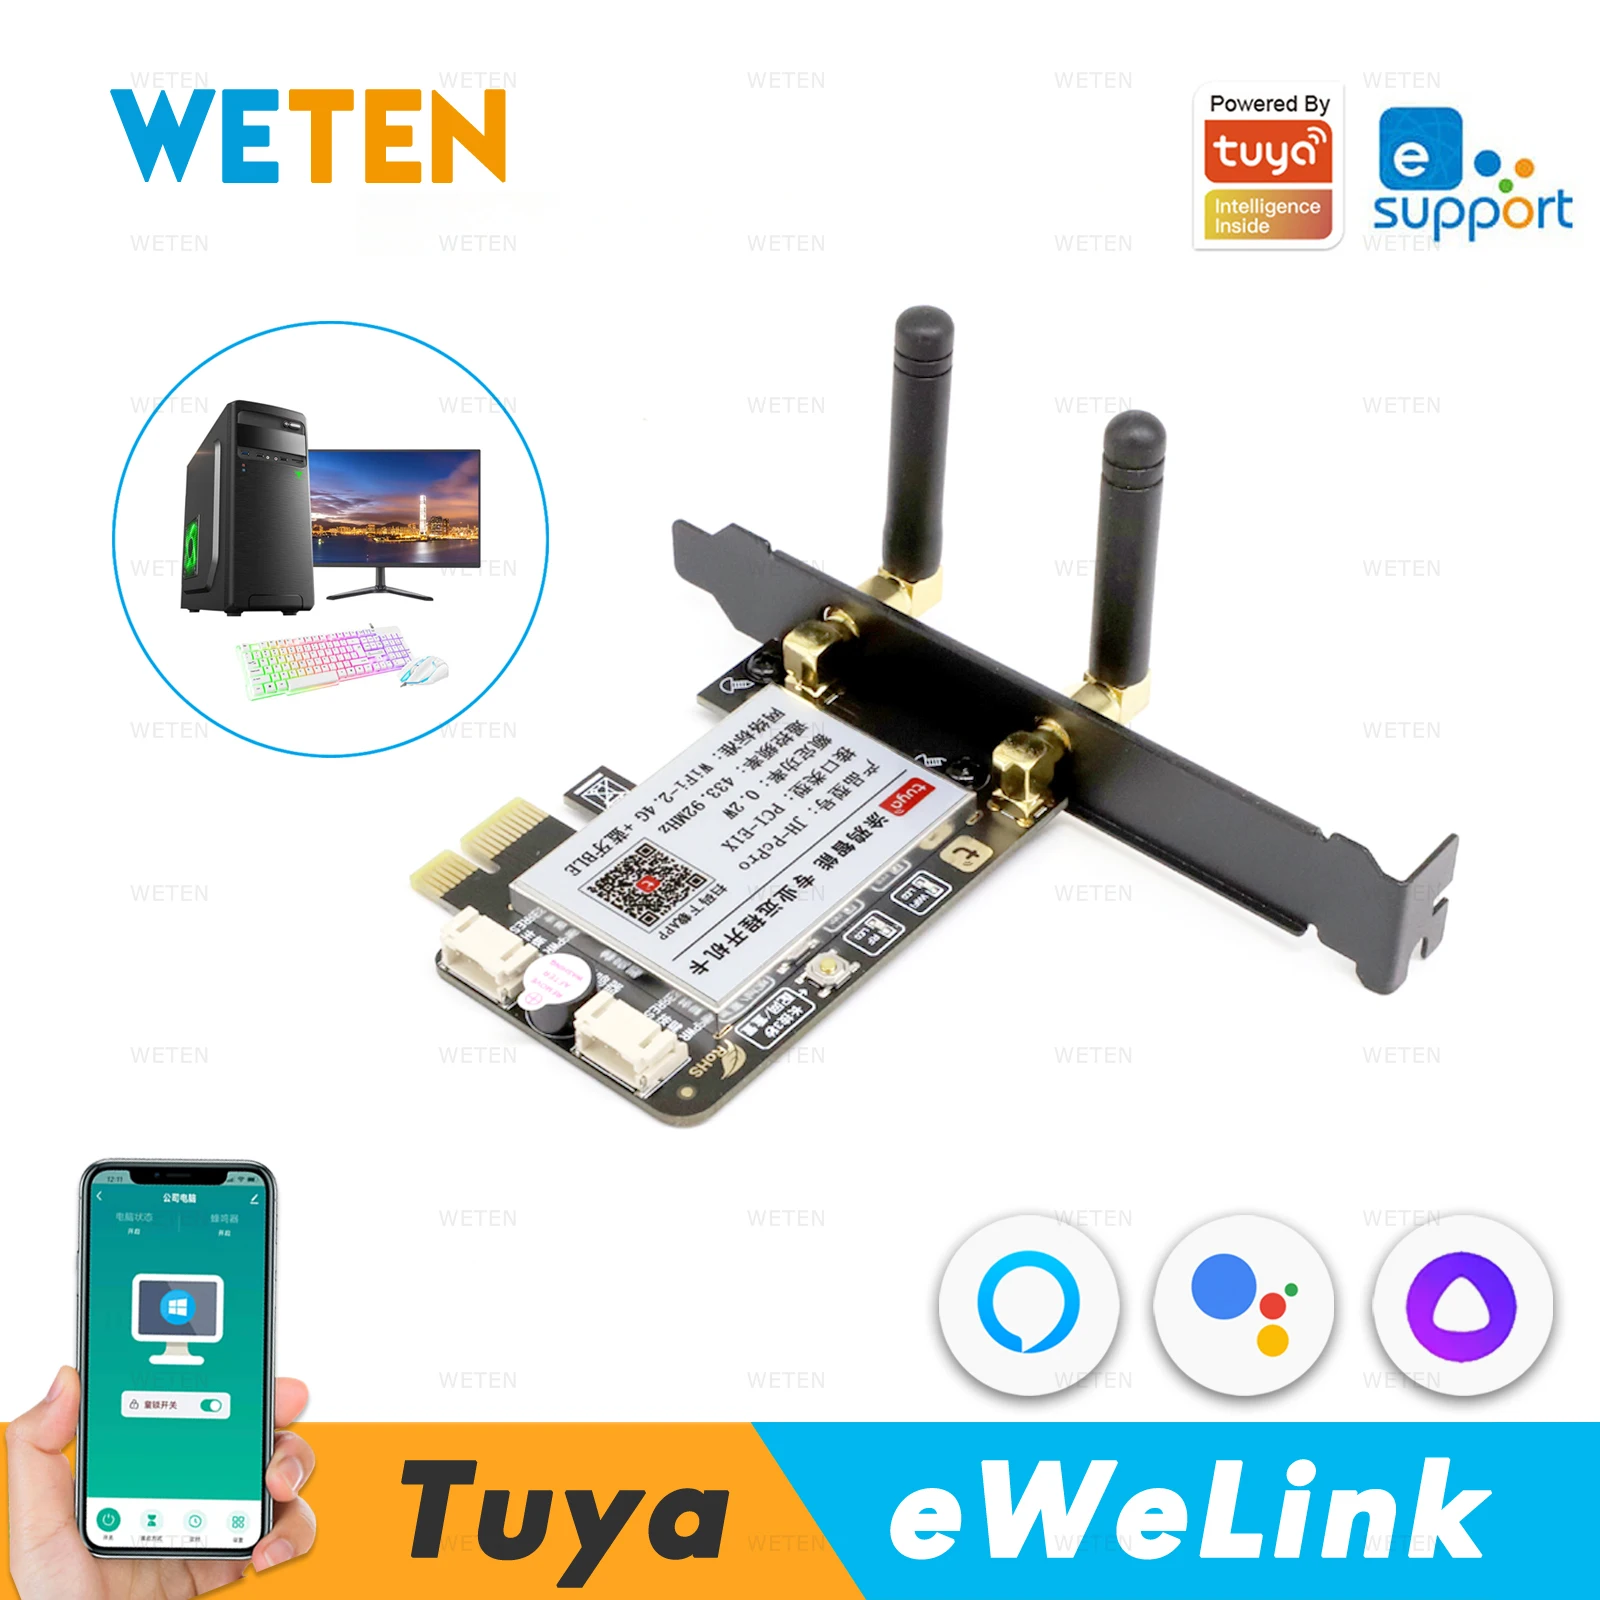 

Tuya eWeLink Wifi Computer Power Reset Switch PCIe Card for PC Destop Computer, APP Remote Control, Support Alexa Google Home